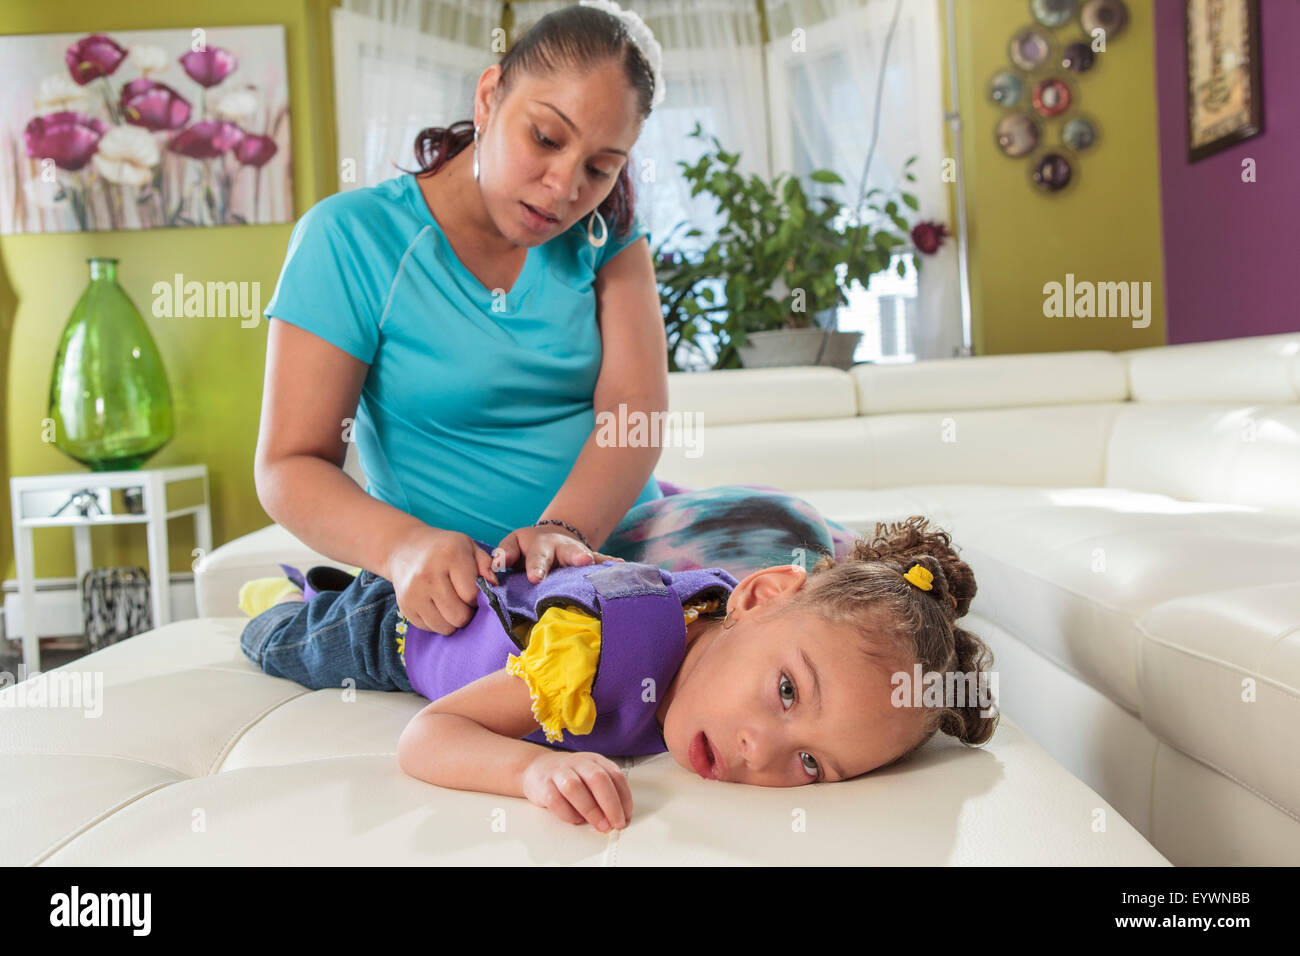 Mother caring for daughter with Cerebral Palsy Stock Photo